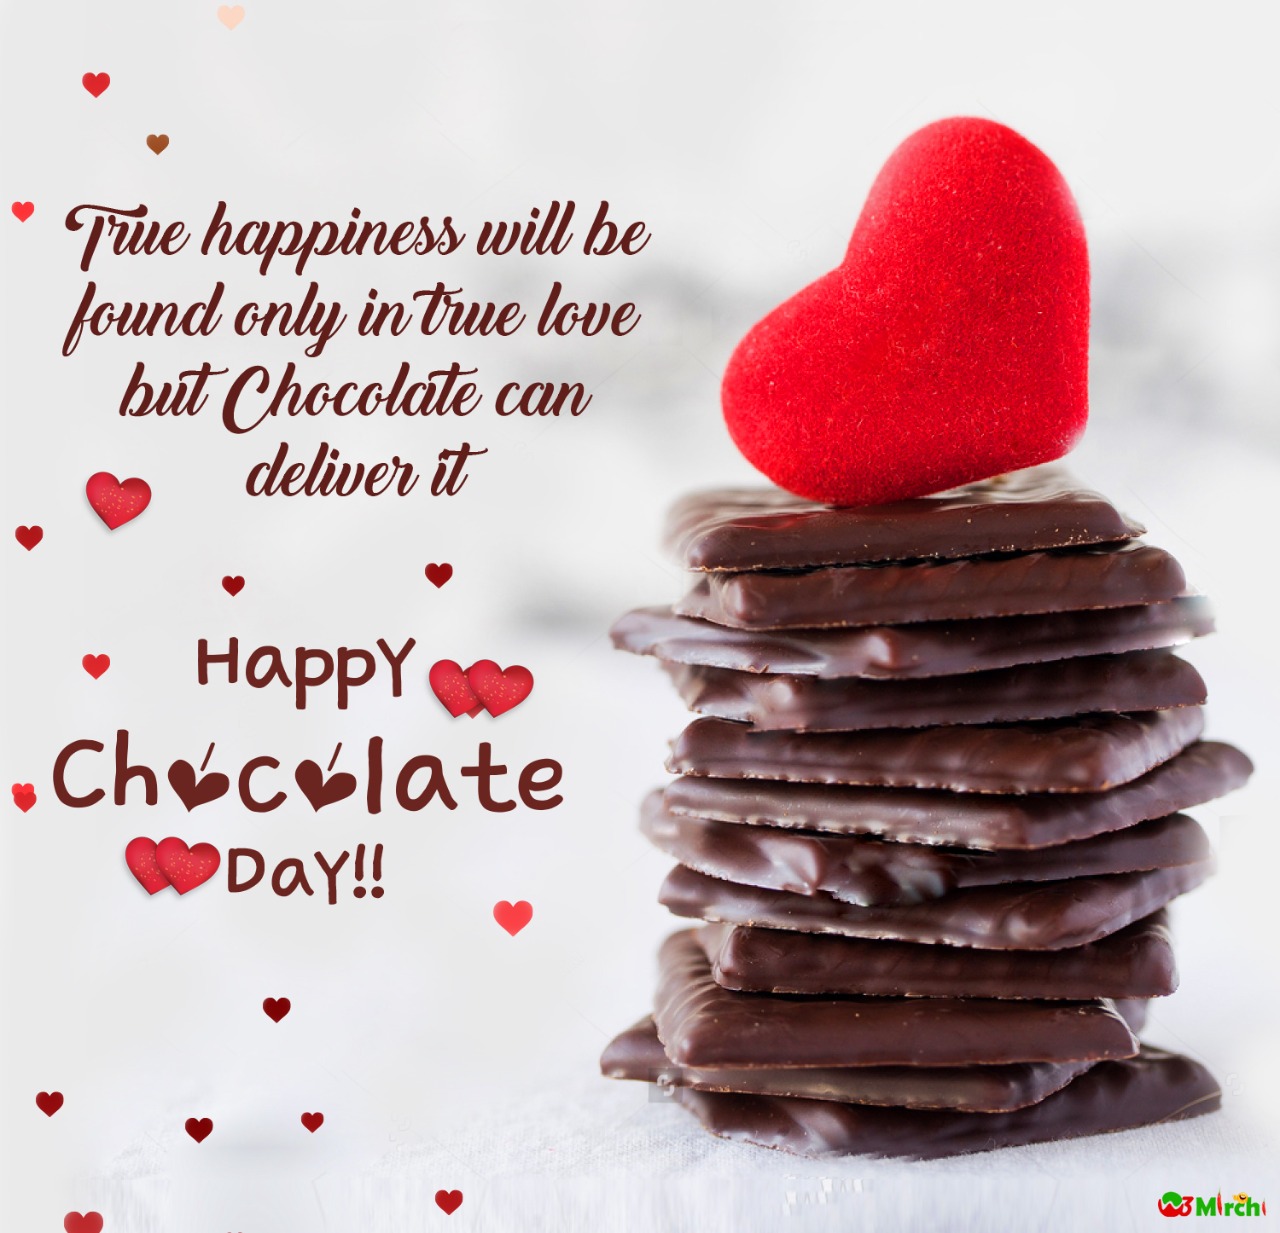 Happy Chocolate Day Love - Valentine Day Images